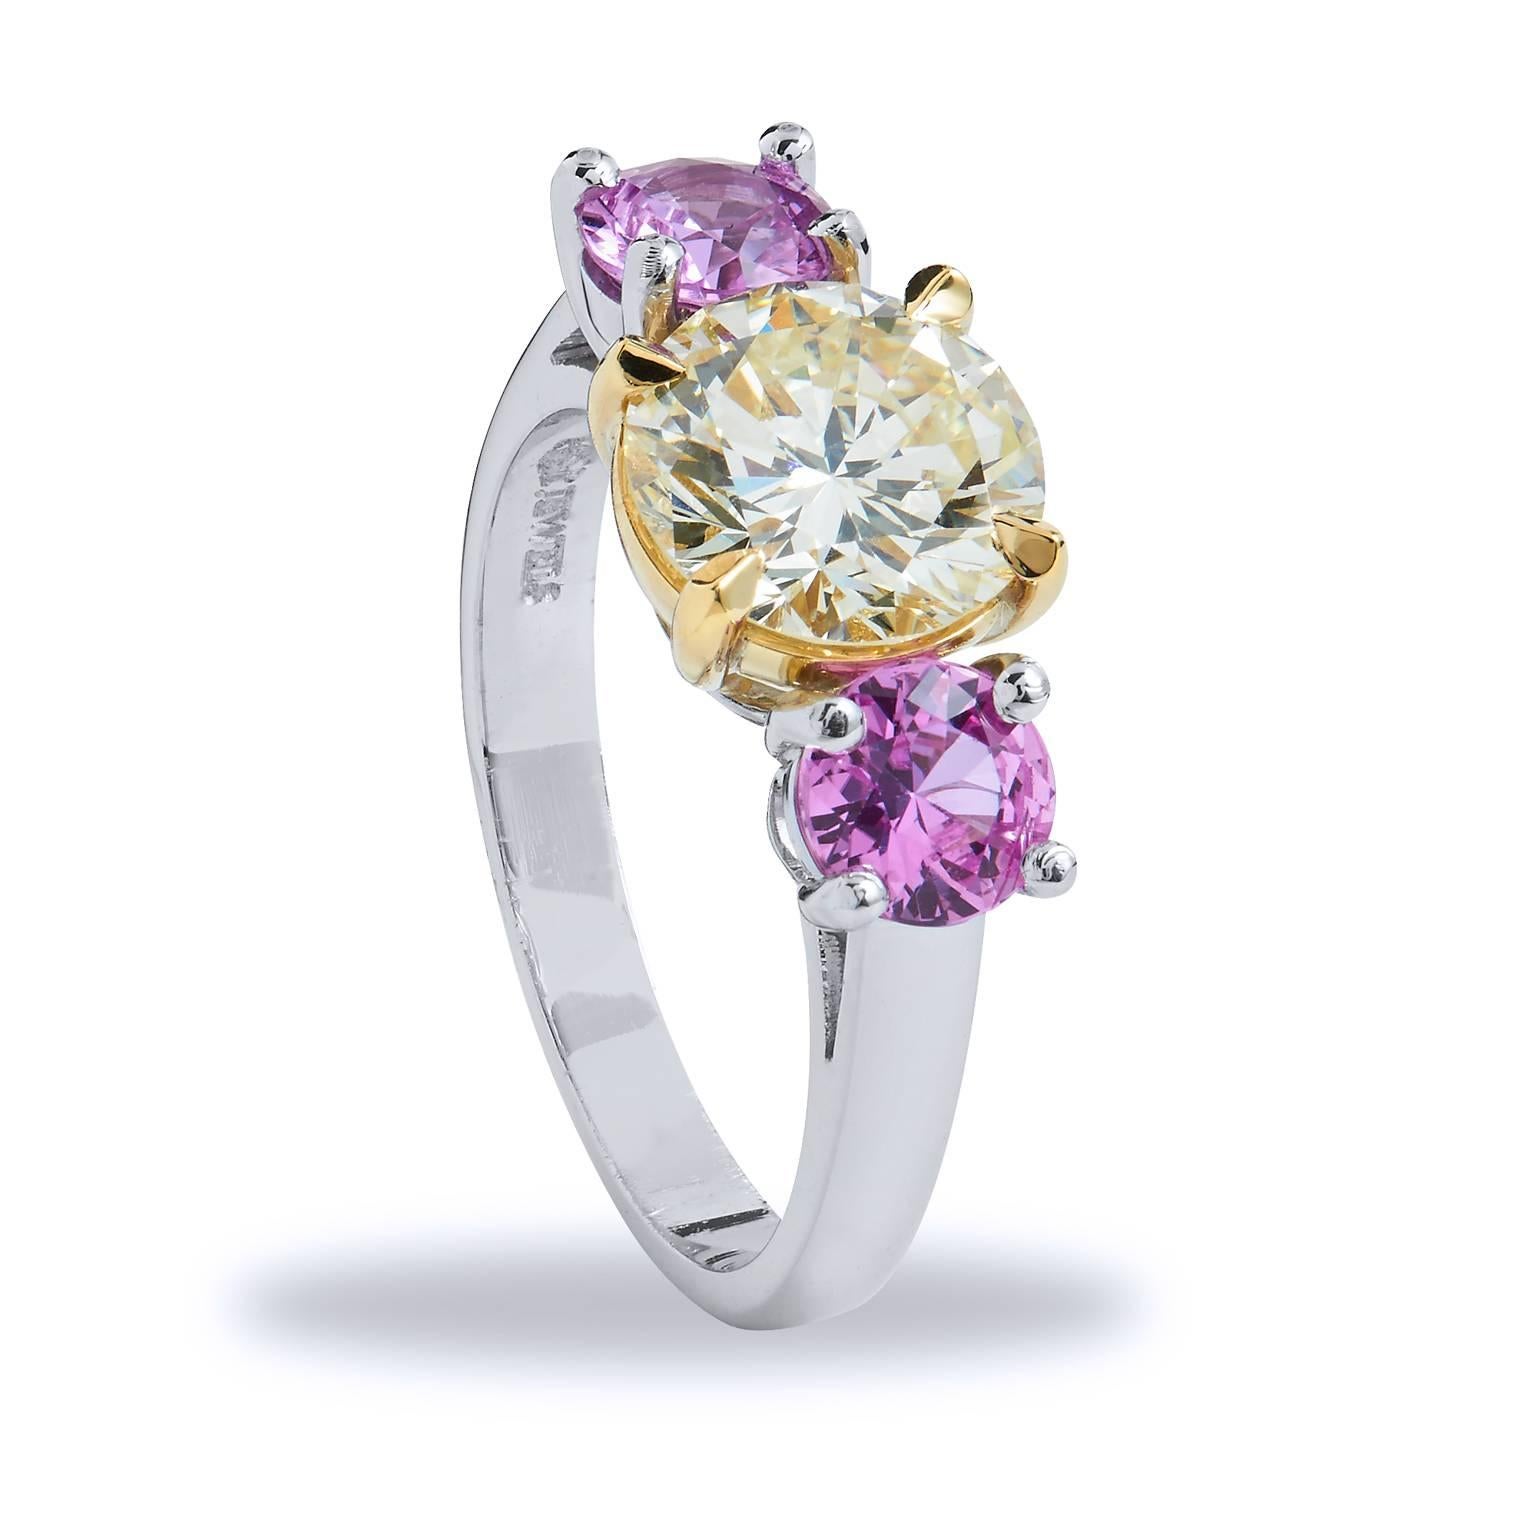 GIA Certified  1.81 Carat Three Stone Pink Sapphire Diamond Gold Platinum Ring 

Evoking the senses to the blossoming colors of spring with two radiant pink sapphires weighing 1.09 carat that hug a beautiful 1.81 carat GIA certified  round brilliant